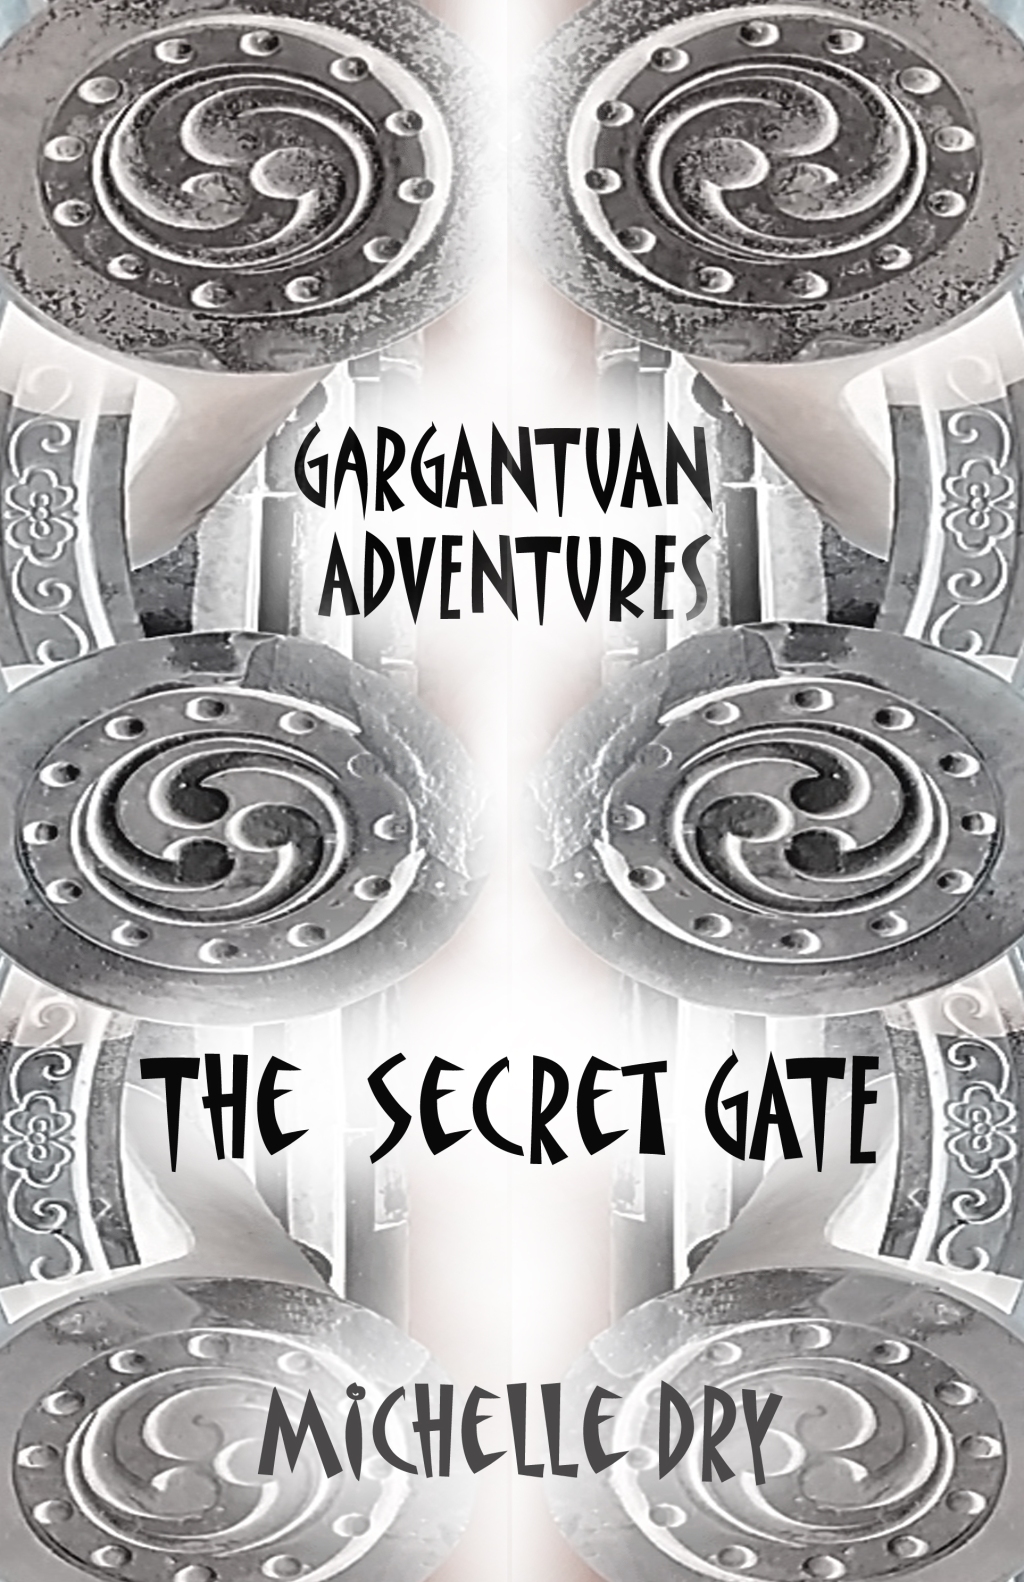 JUST 2 DAYS TO GO UNTIL GARGANTUAN ADVENTURES – THE SECRET GATE IS BORN INTO REALITY